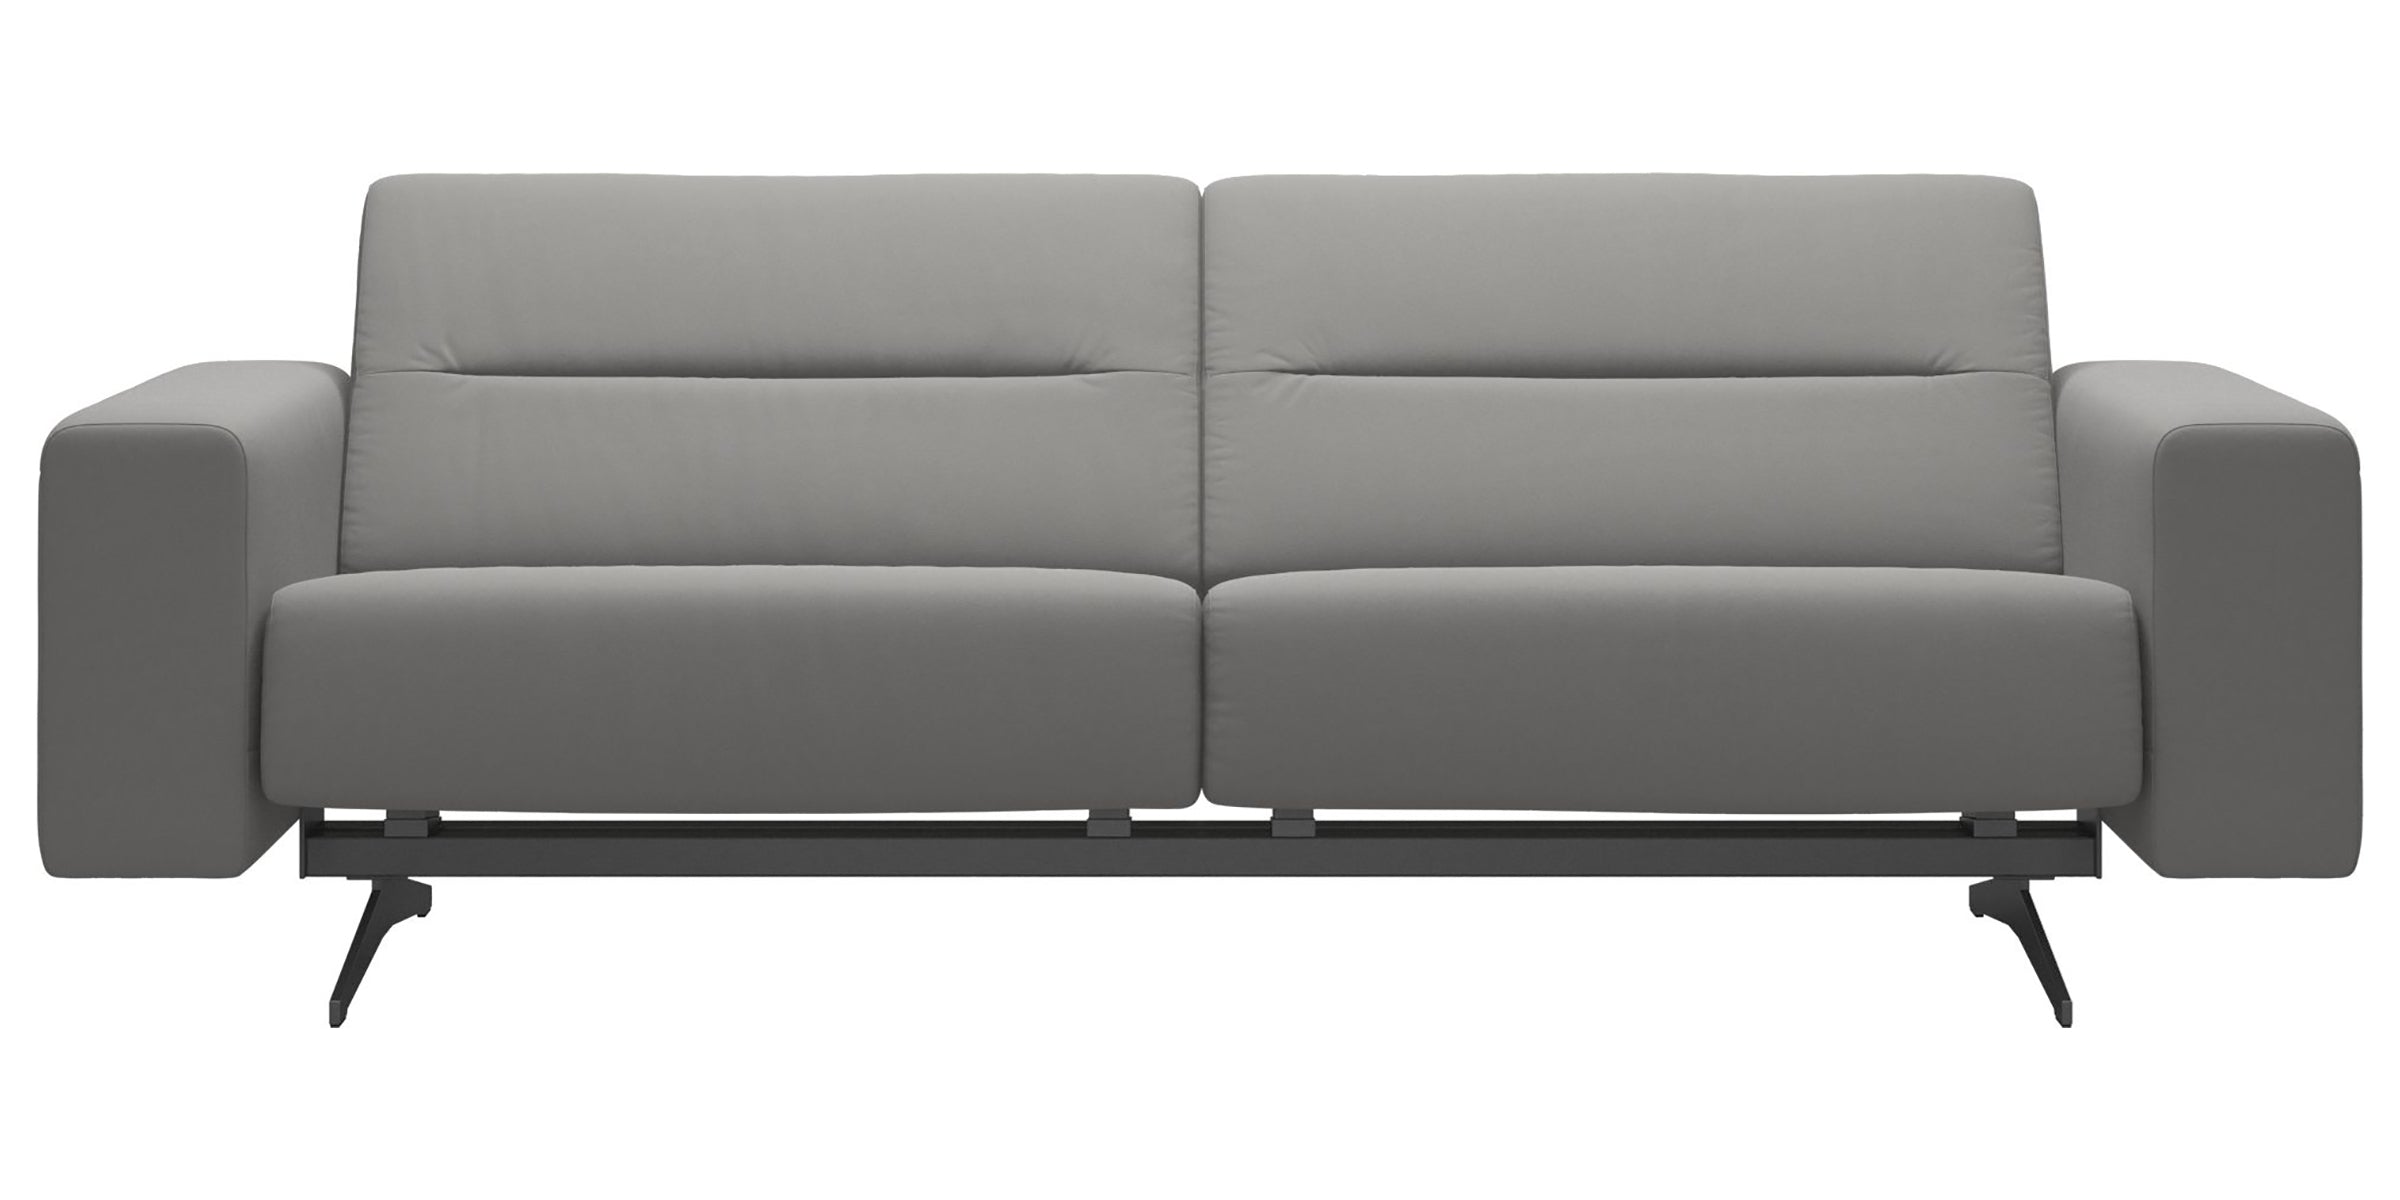 Paloma Leather Silver Grey & Chrome Base | Stressless Stella 2.5-Seater Sofa with S1 Arm | Valley Ridge Furniture